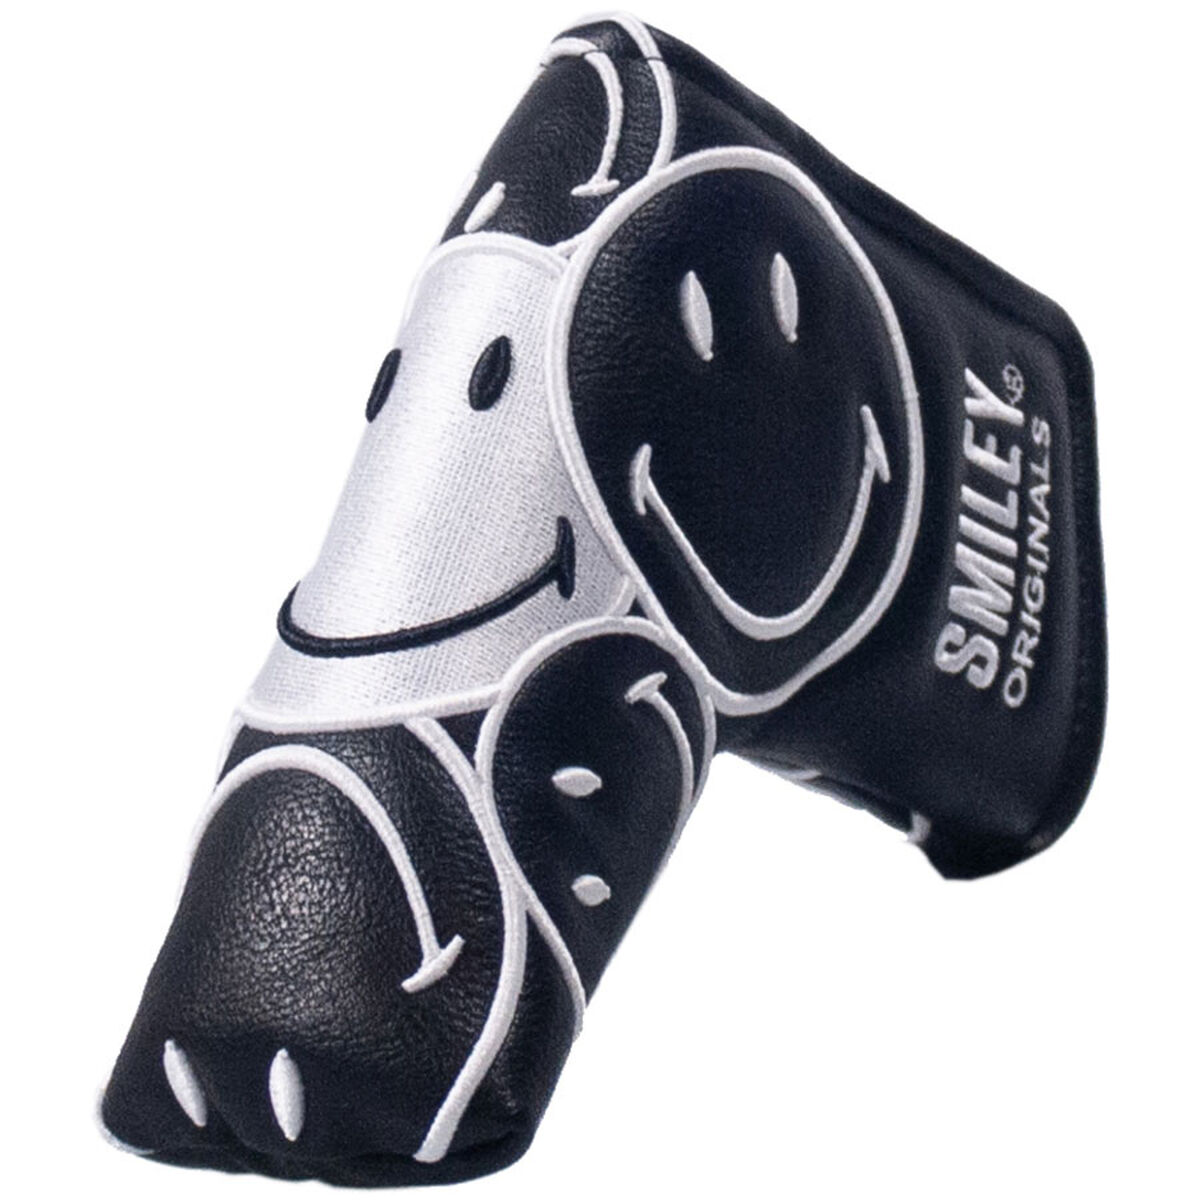 Smiley Original Stacked Blade Golf Putter Head Cover, Mens, Blade, Black/white | American Golf